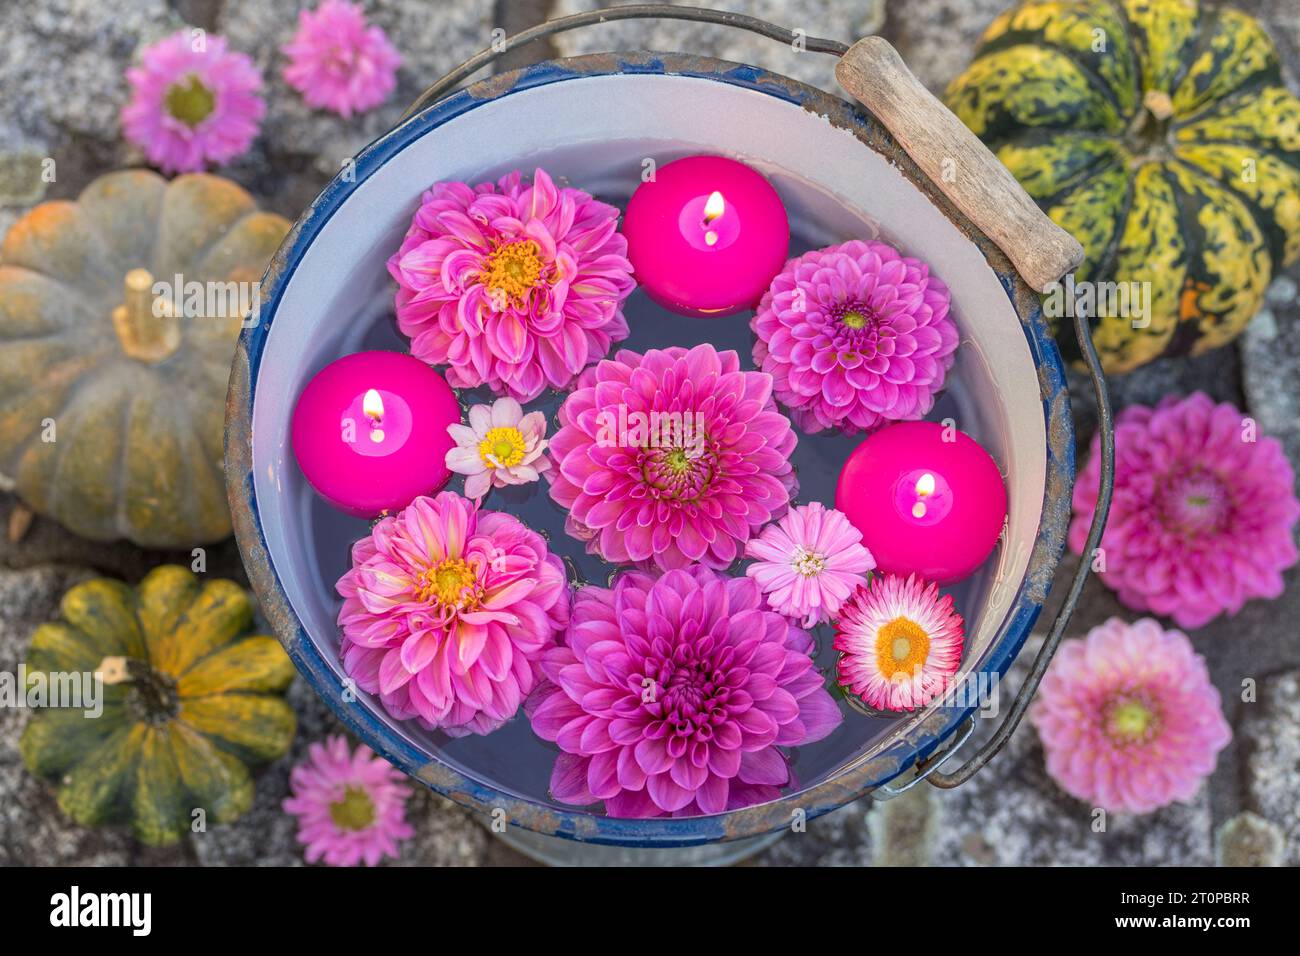 romantic arrangement with floating candles and pink dahlia flowers in vintage bucket Stock Photo